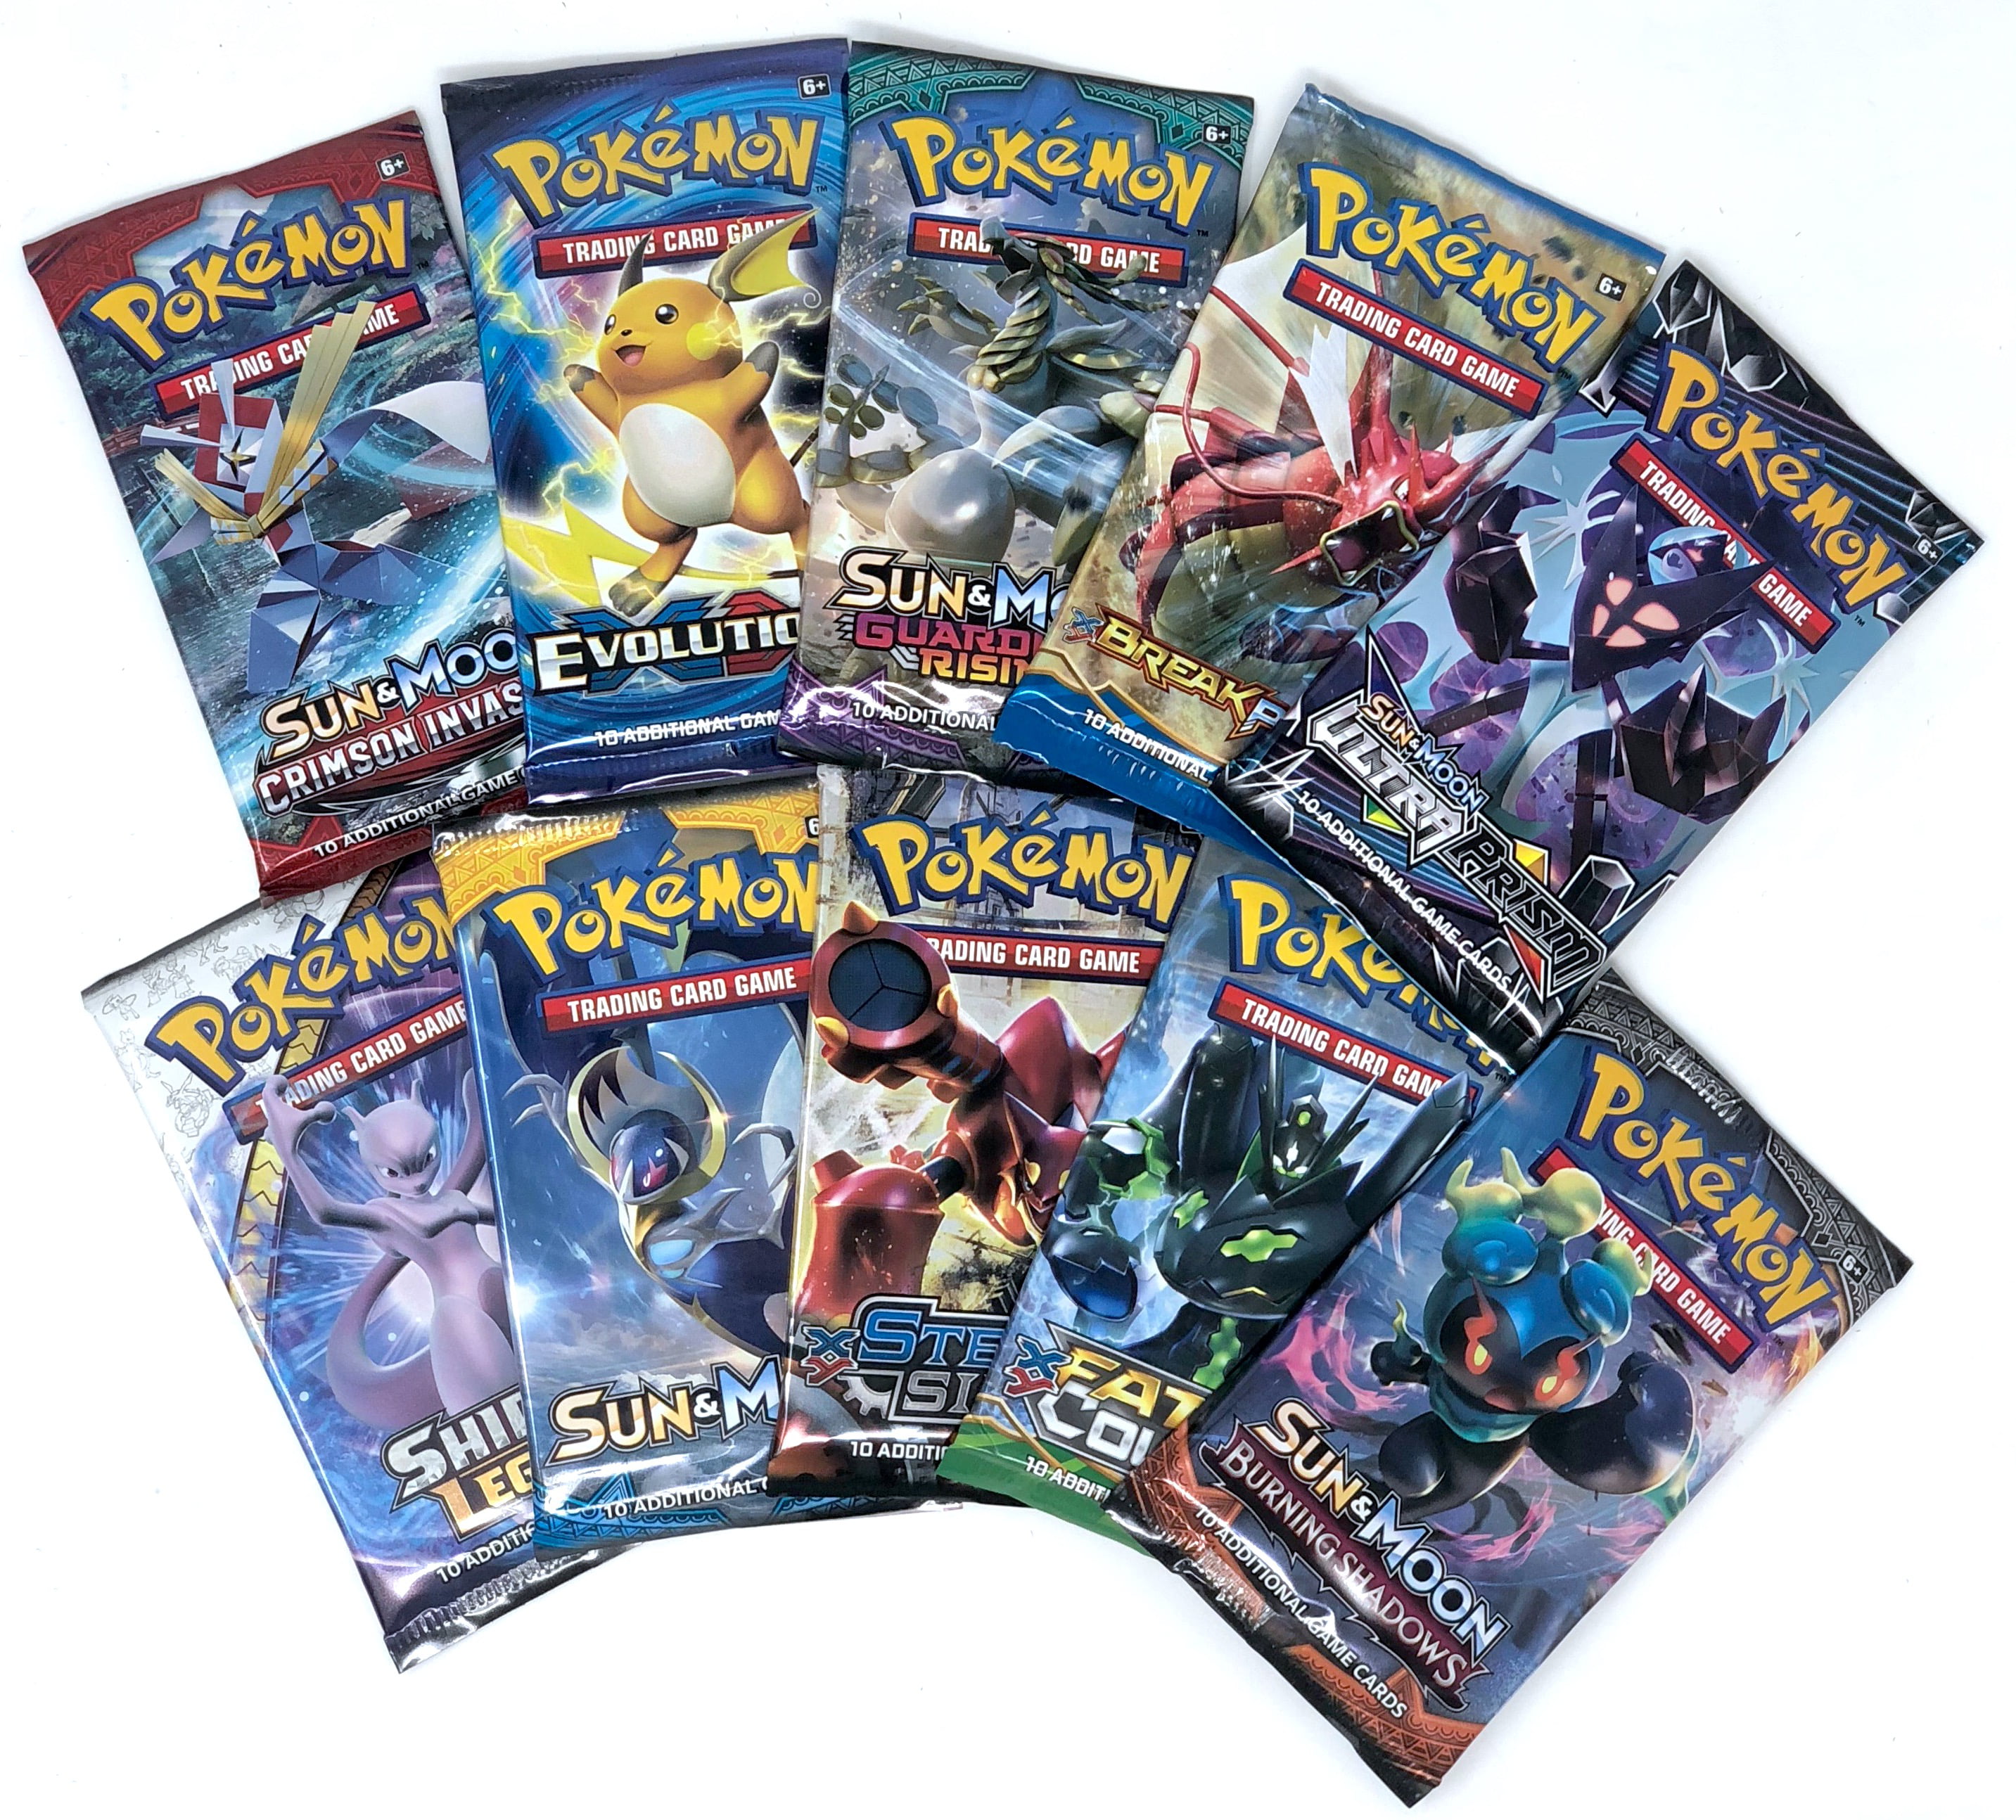 Pokemon Trading Cards Hidden Fates Booster Packs Lot of 4 Brand New and Sealed